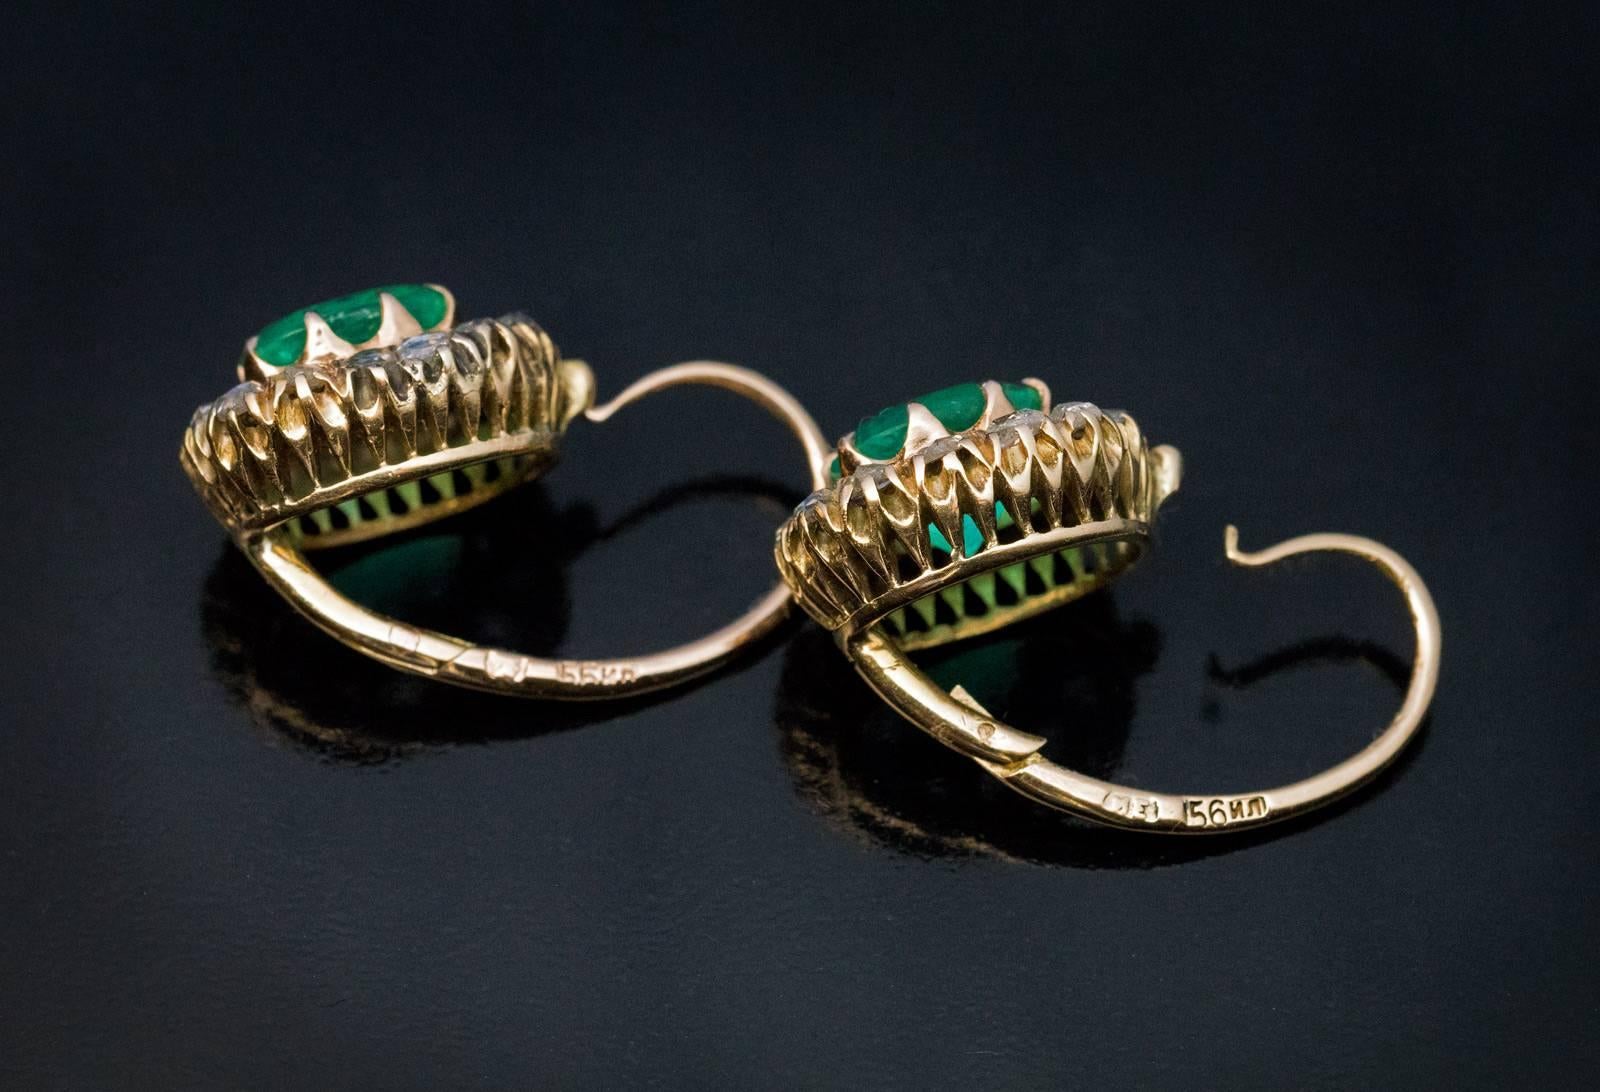 Made in Moscow between 1899 and 1908
Antique 14K gold cluster earrings are set with sparkling emeralds surrounded by old rose cut diamonds.

Estimated weight of the emeralds:  1.29 ct and 1.02 ct.
The earrings are marked with 56 zolotnik Imperial